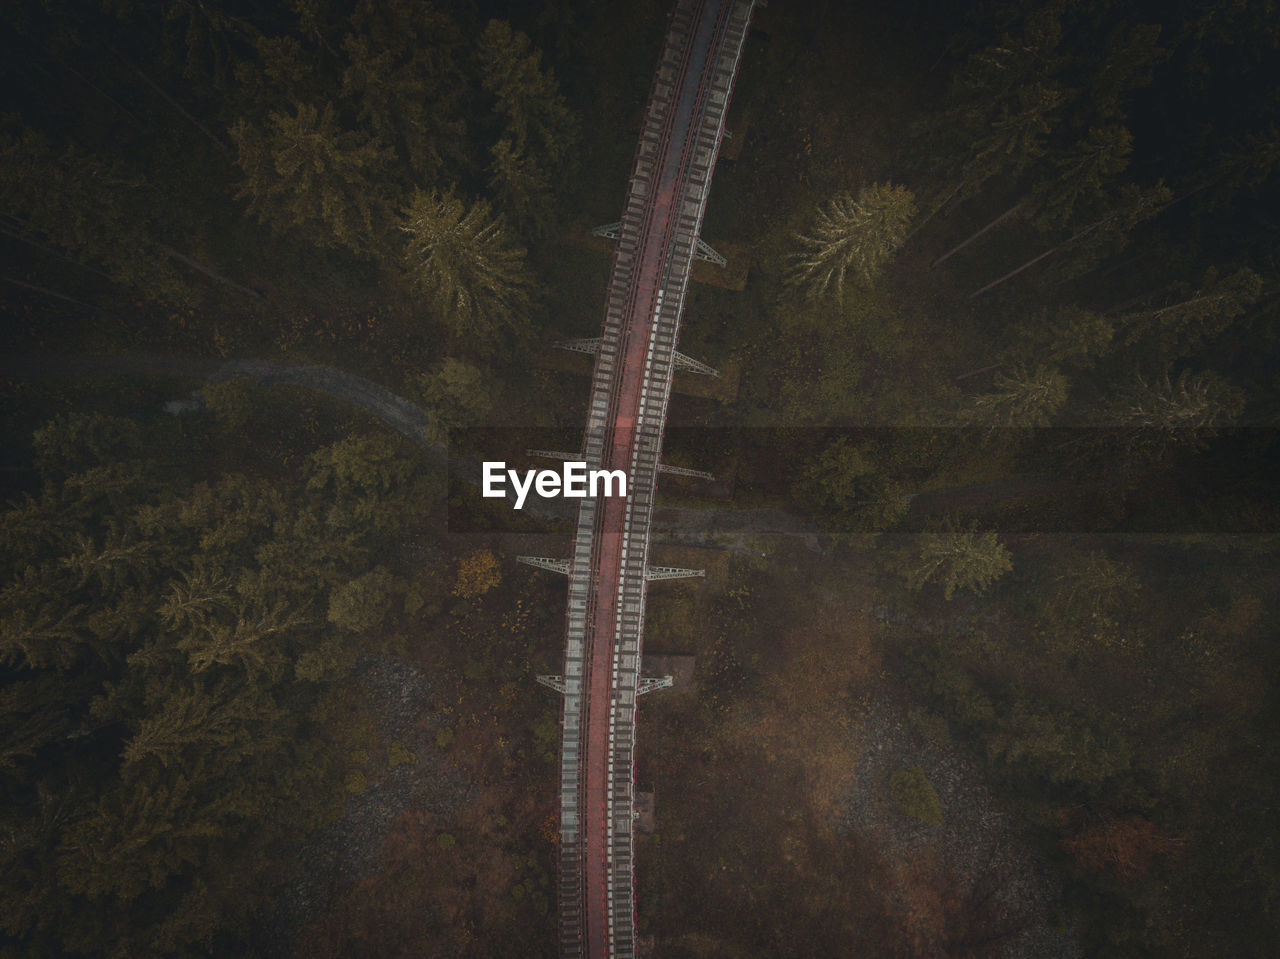 High angle view drone over a railroad bridge in a forest with pine trees